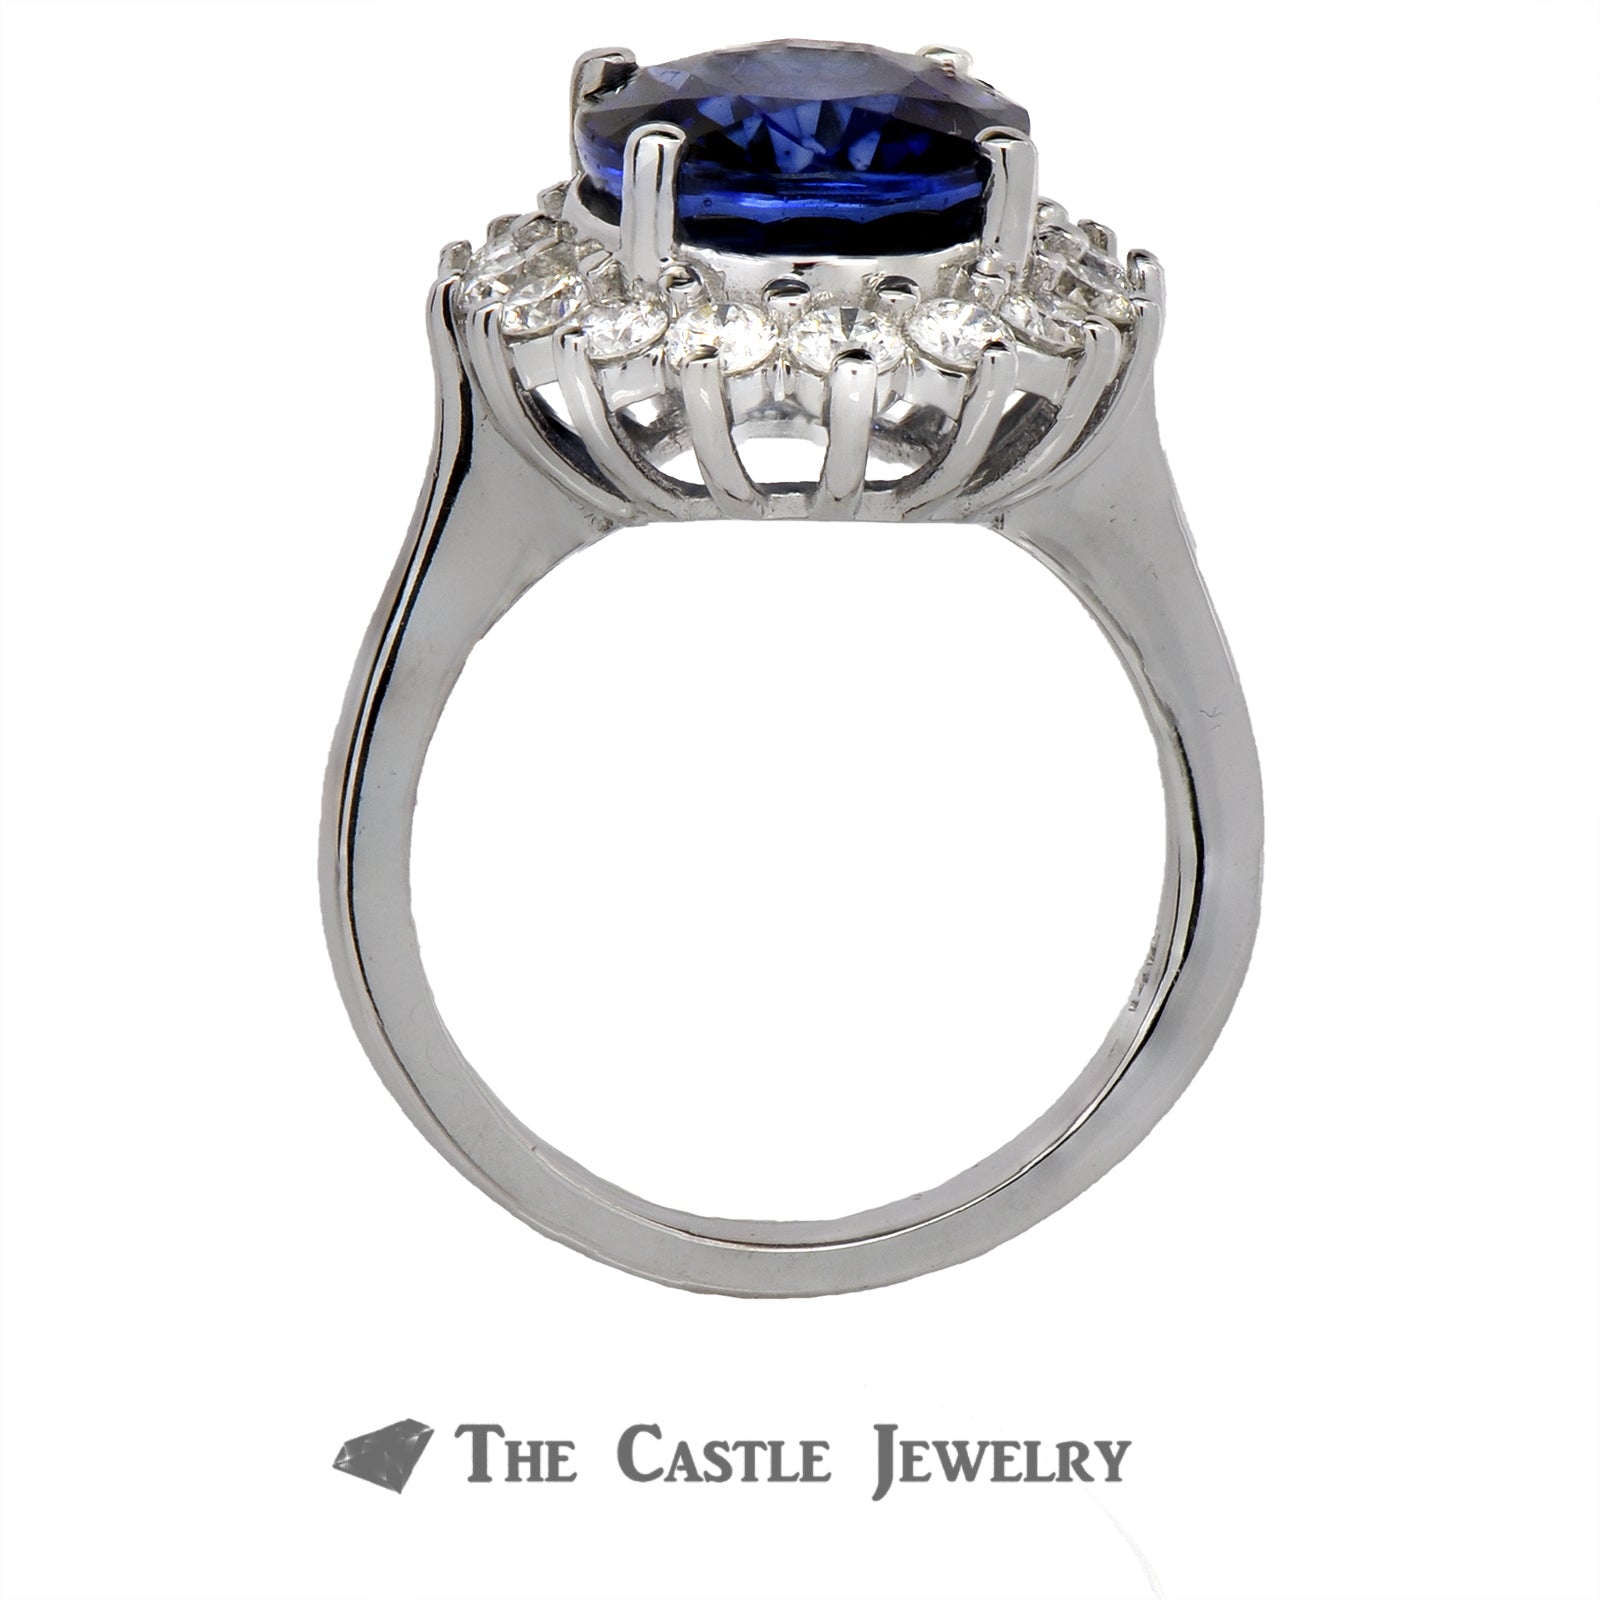 Princess Diana Inspired Recrystallized Sapphire Ring with 1cttw Diamond Halo-1